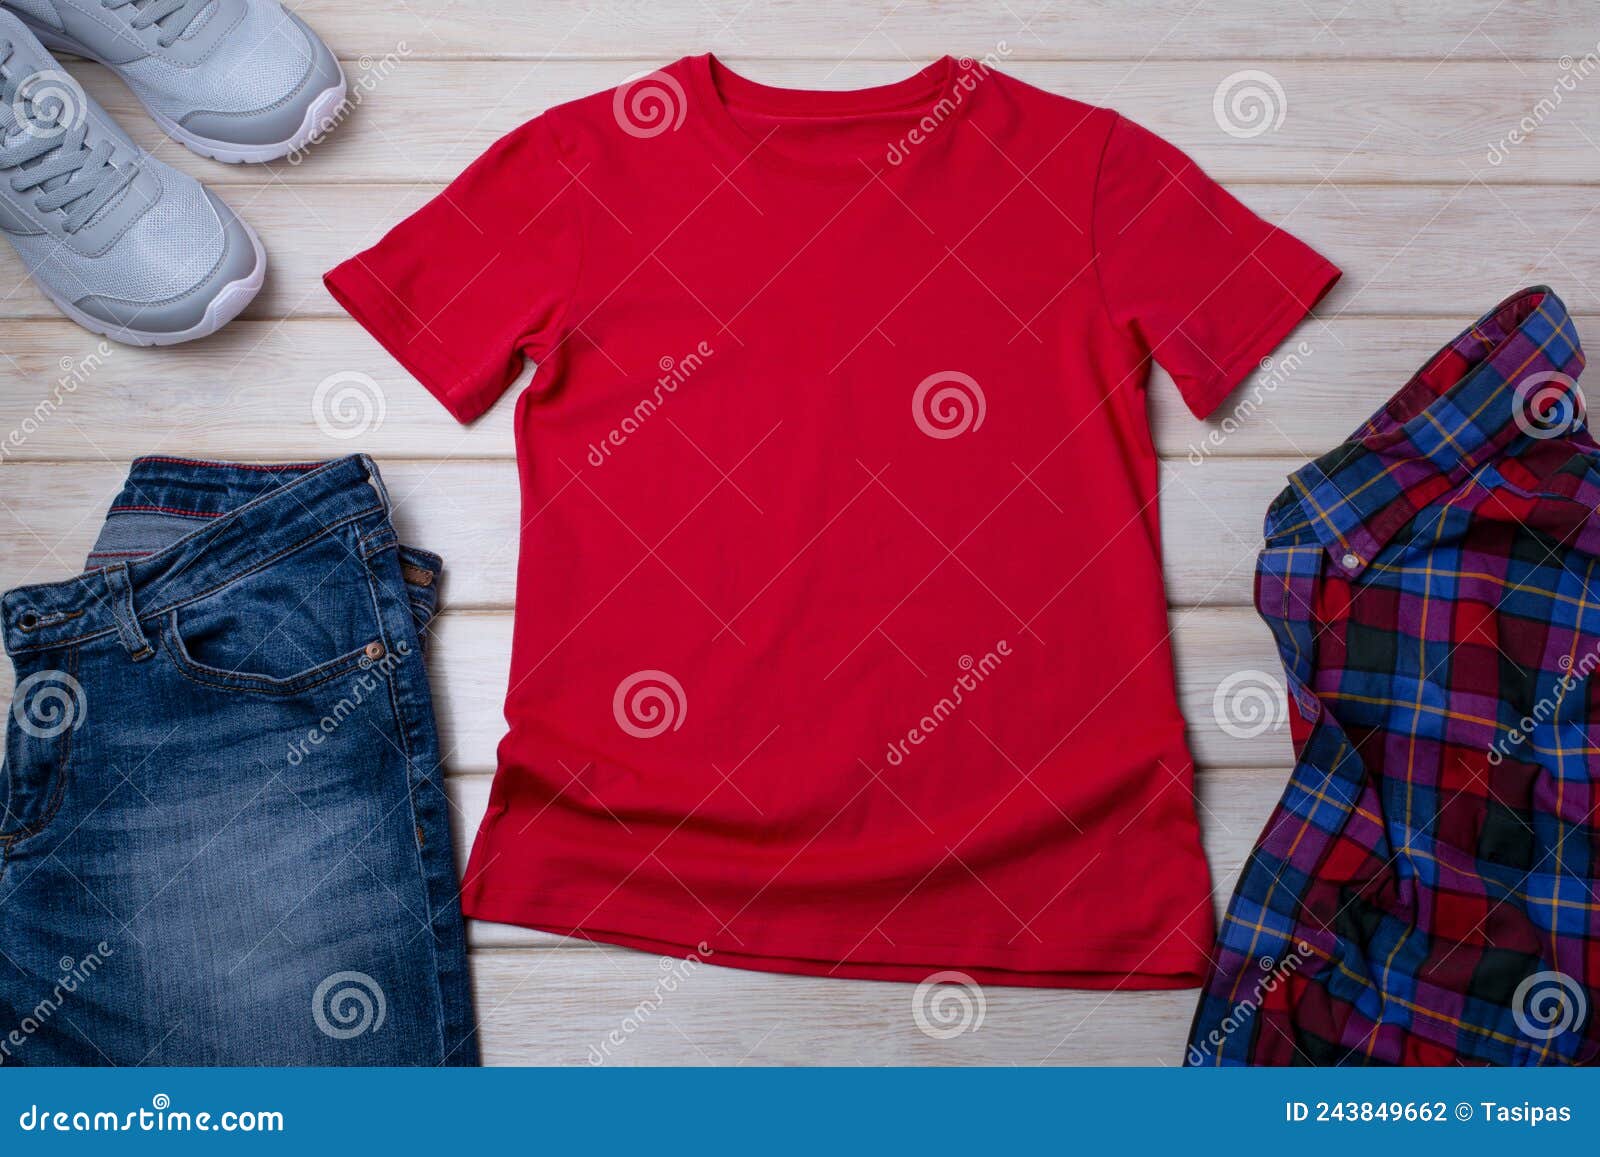 Unisex Red T-shirt Mockup with Trainers and Jeans Stock Photo - Image ...